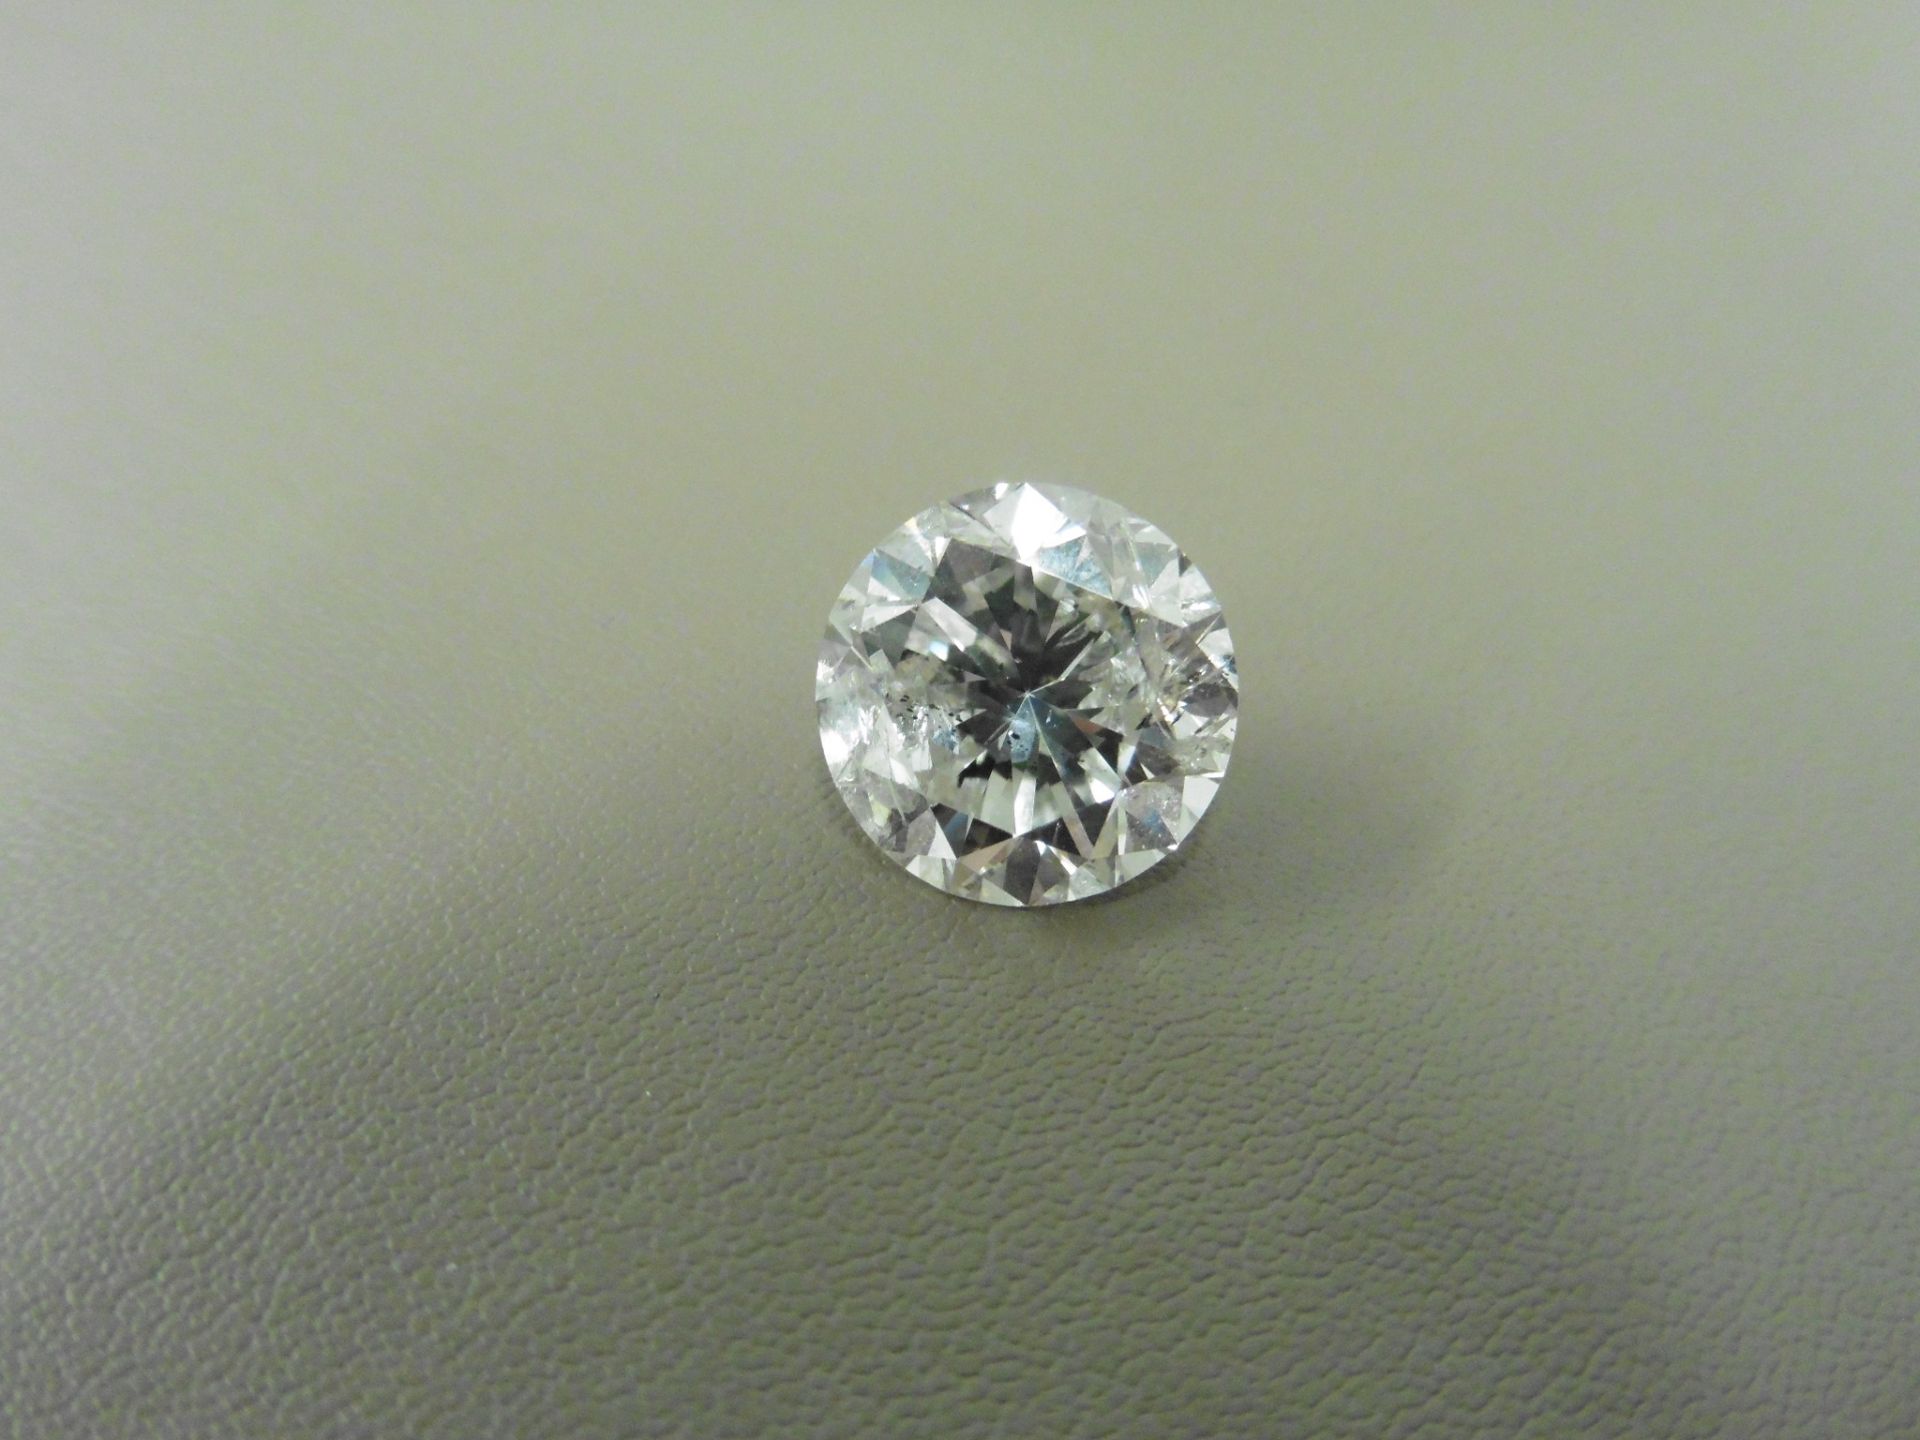 5.04ct natural loose briliant cut diamond. F colour and Il clarity. EGL certification. Valued at £ - Image 5 of 5